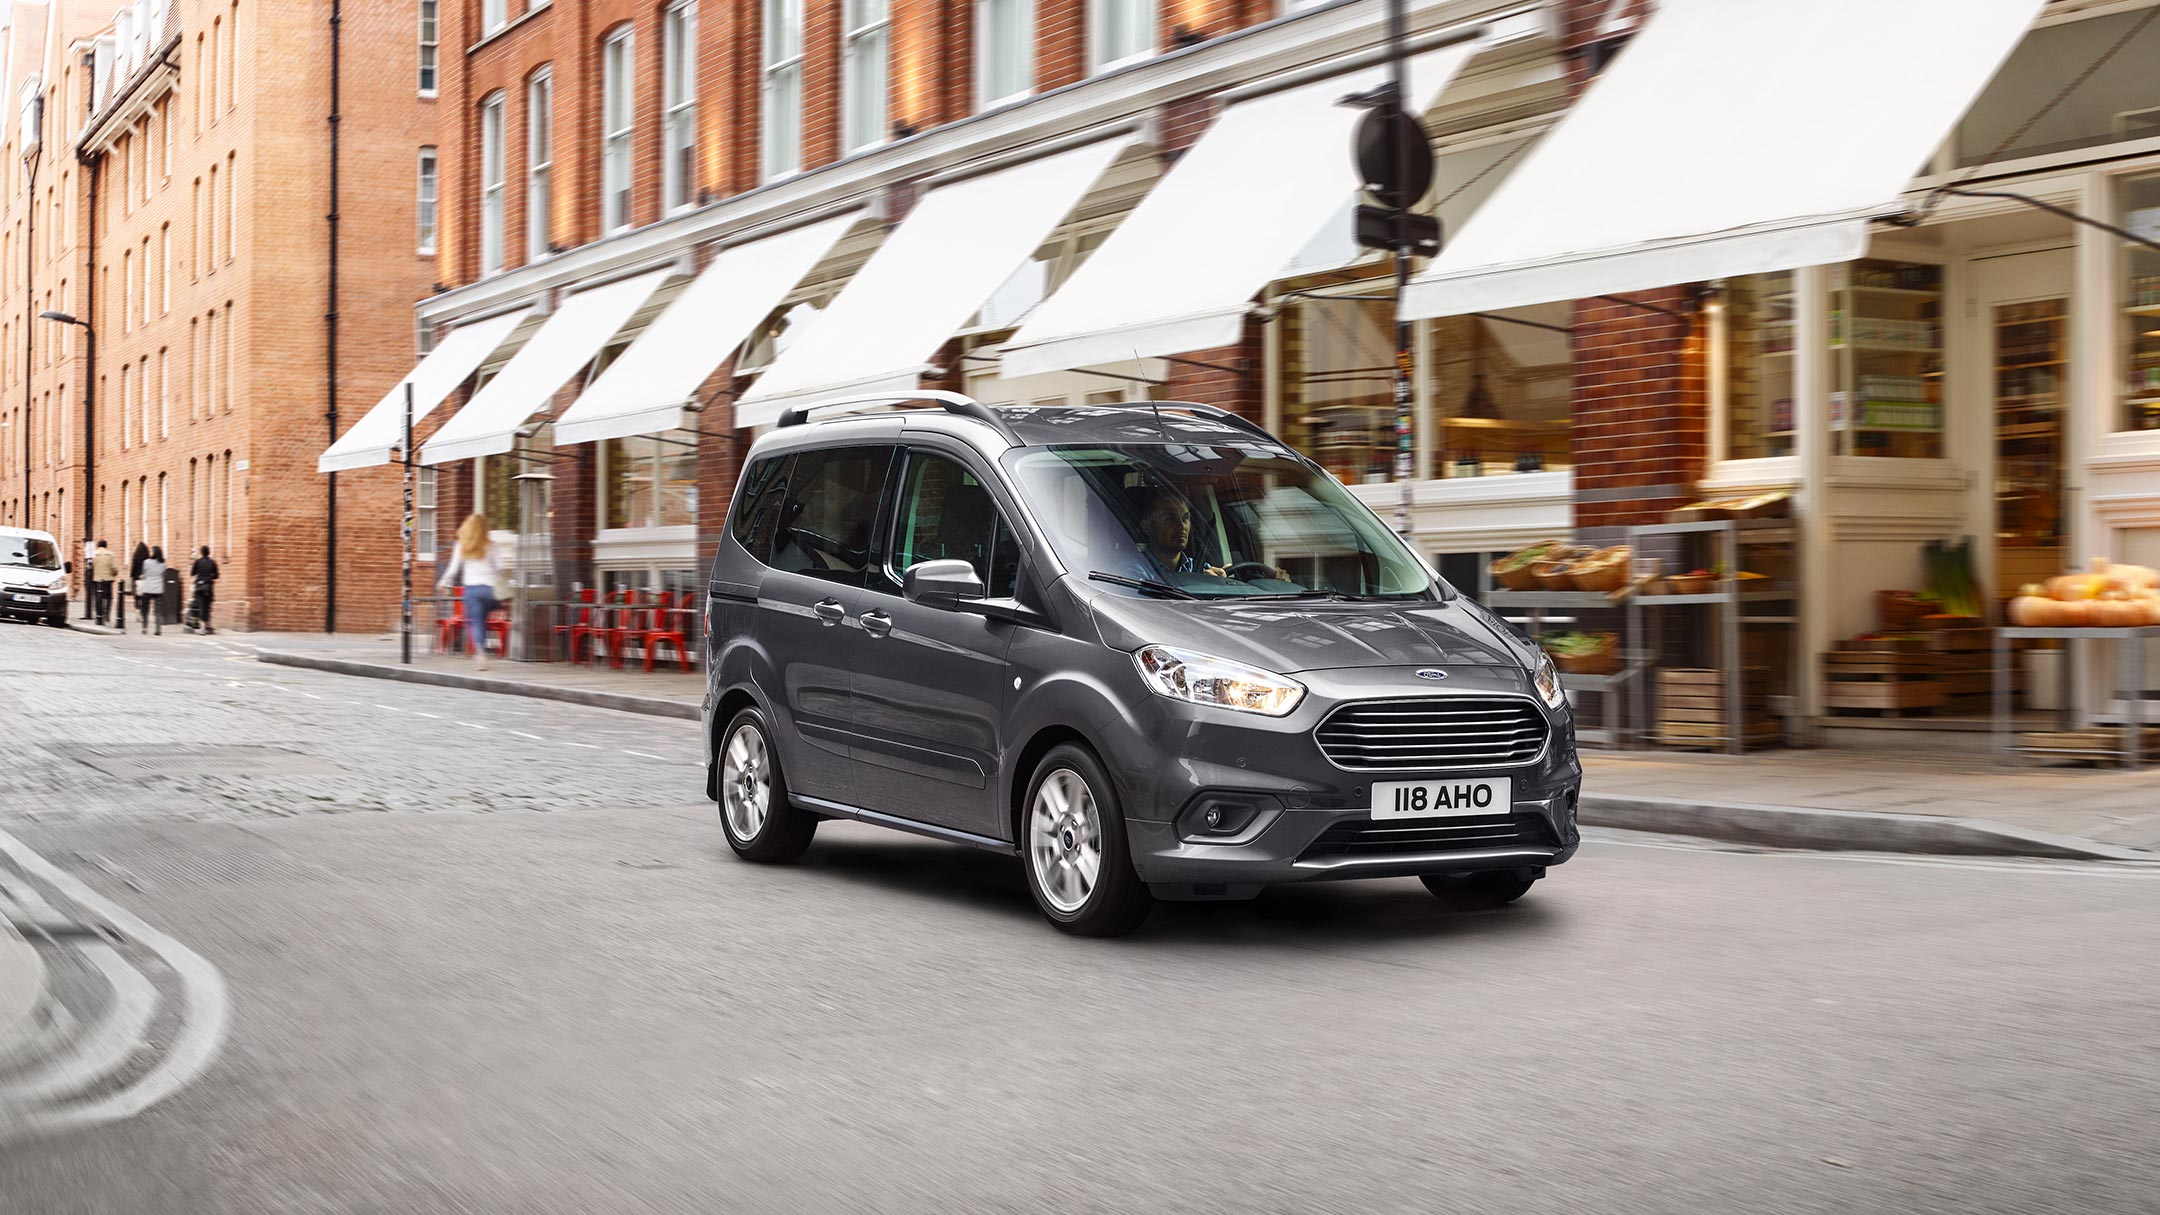 New Ford Tourneo Courier in grey on street